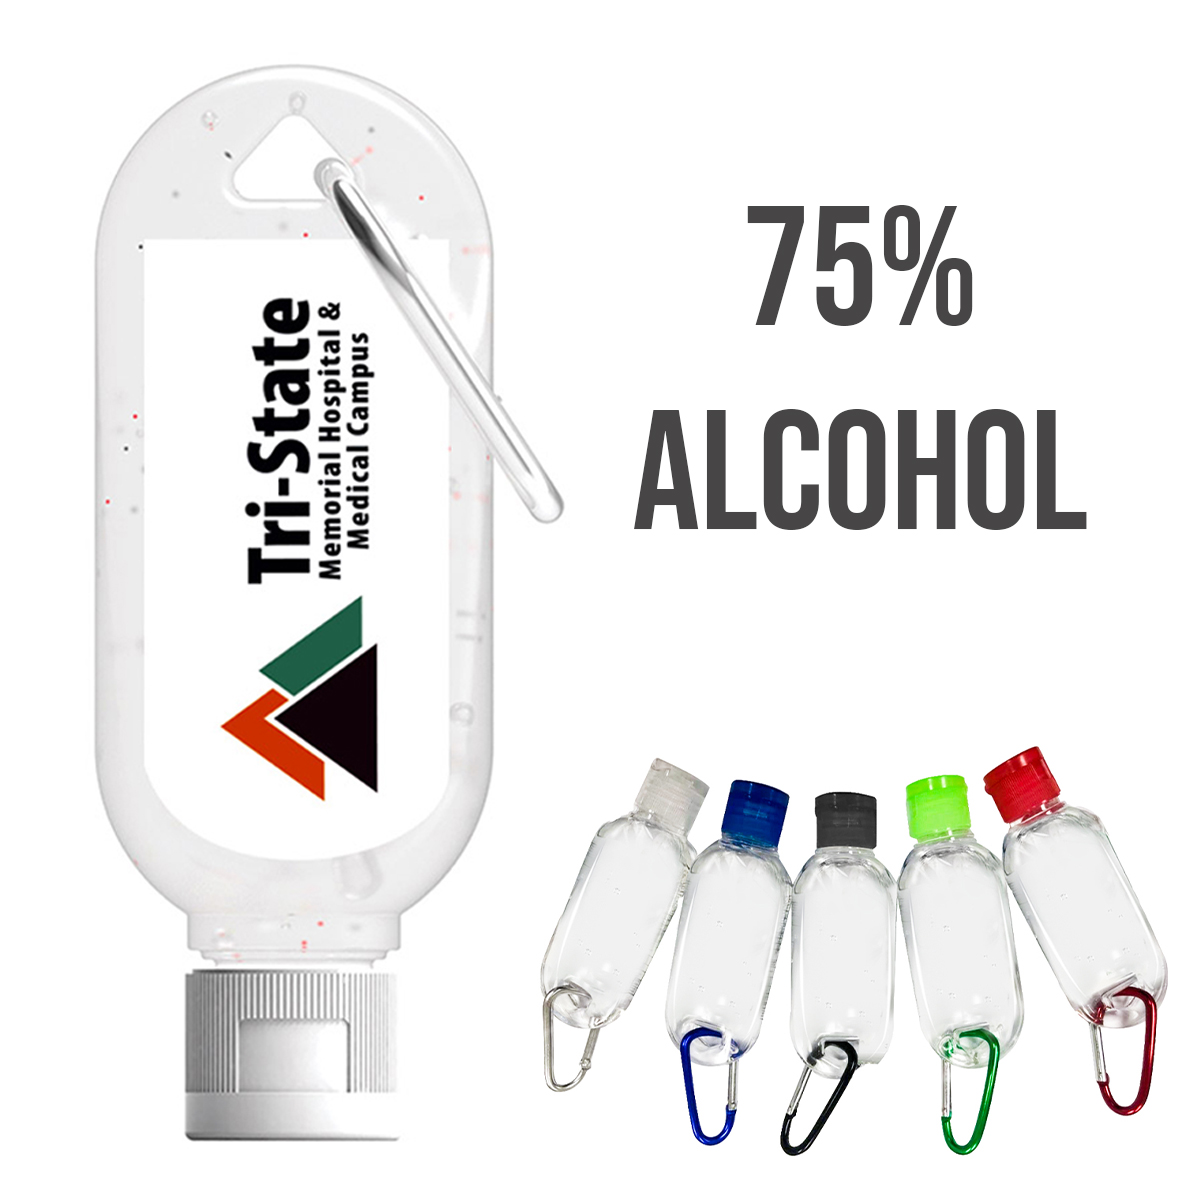 75% ALCOHOL HAND SANITIZER WITH CARABINER CLIP